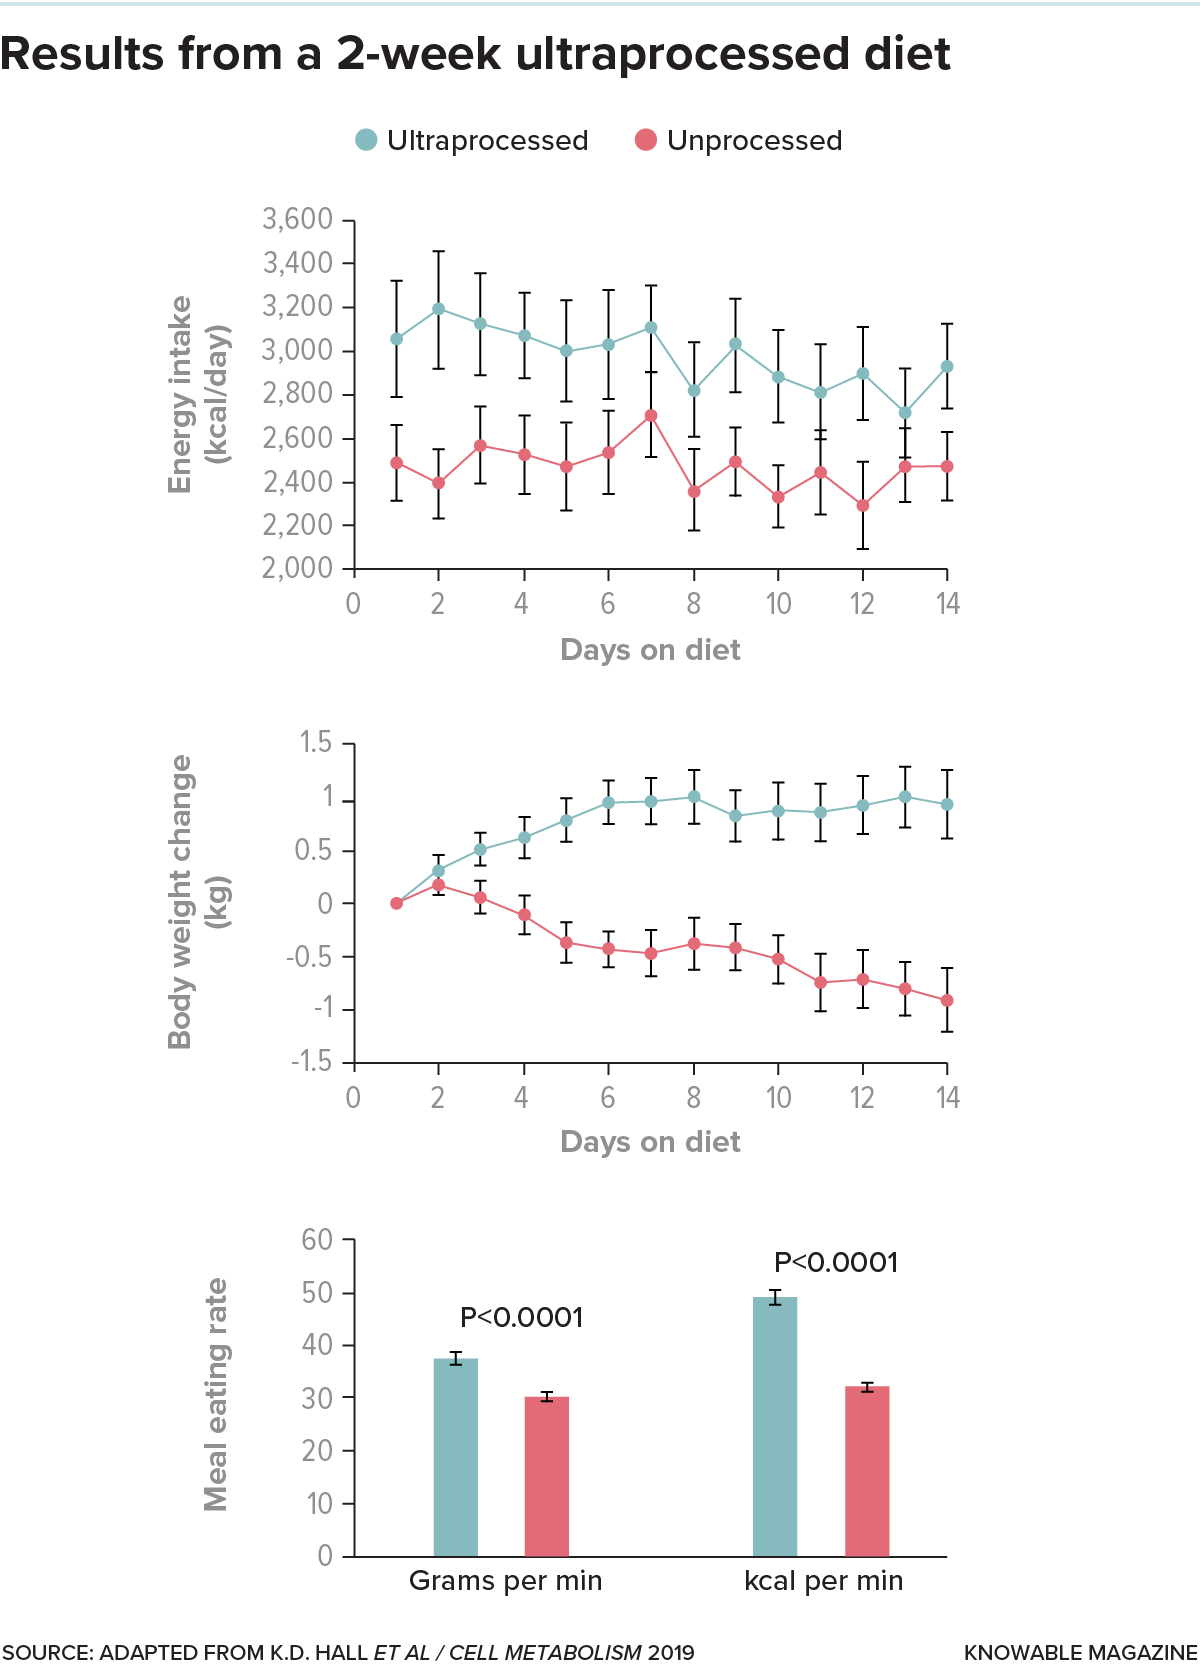 Three graphs. The top one shows consistently higher calorie intake for two weeks of an ultraprocessed diet compared with an unprocessed diet. Middle graph shows weight gain for the ultraprocessed group, bottom graph shows a faster eating rate for that group.